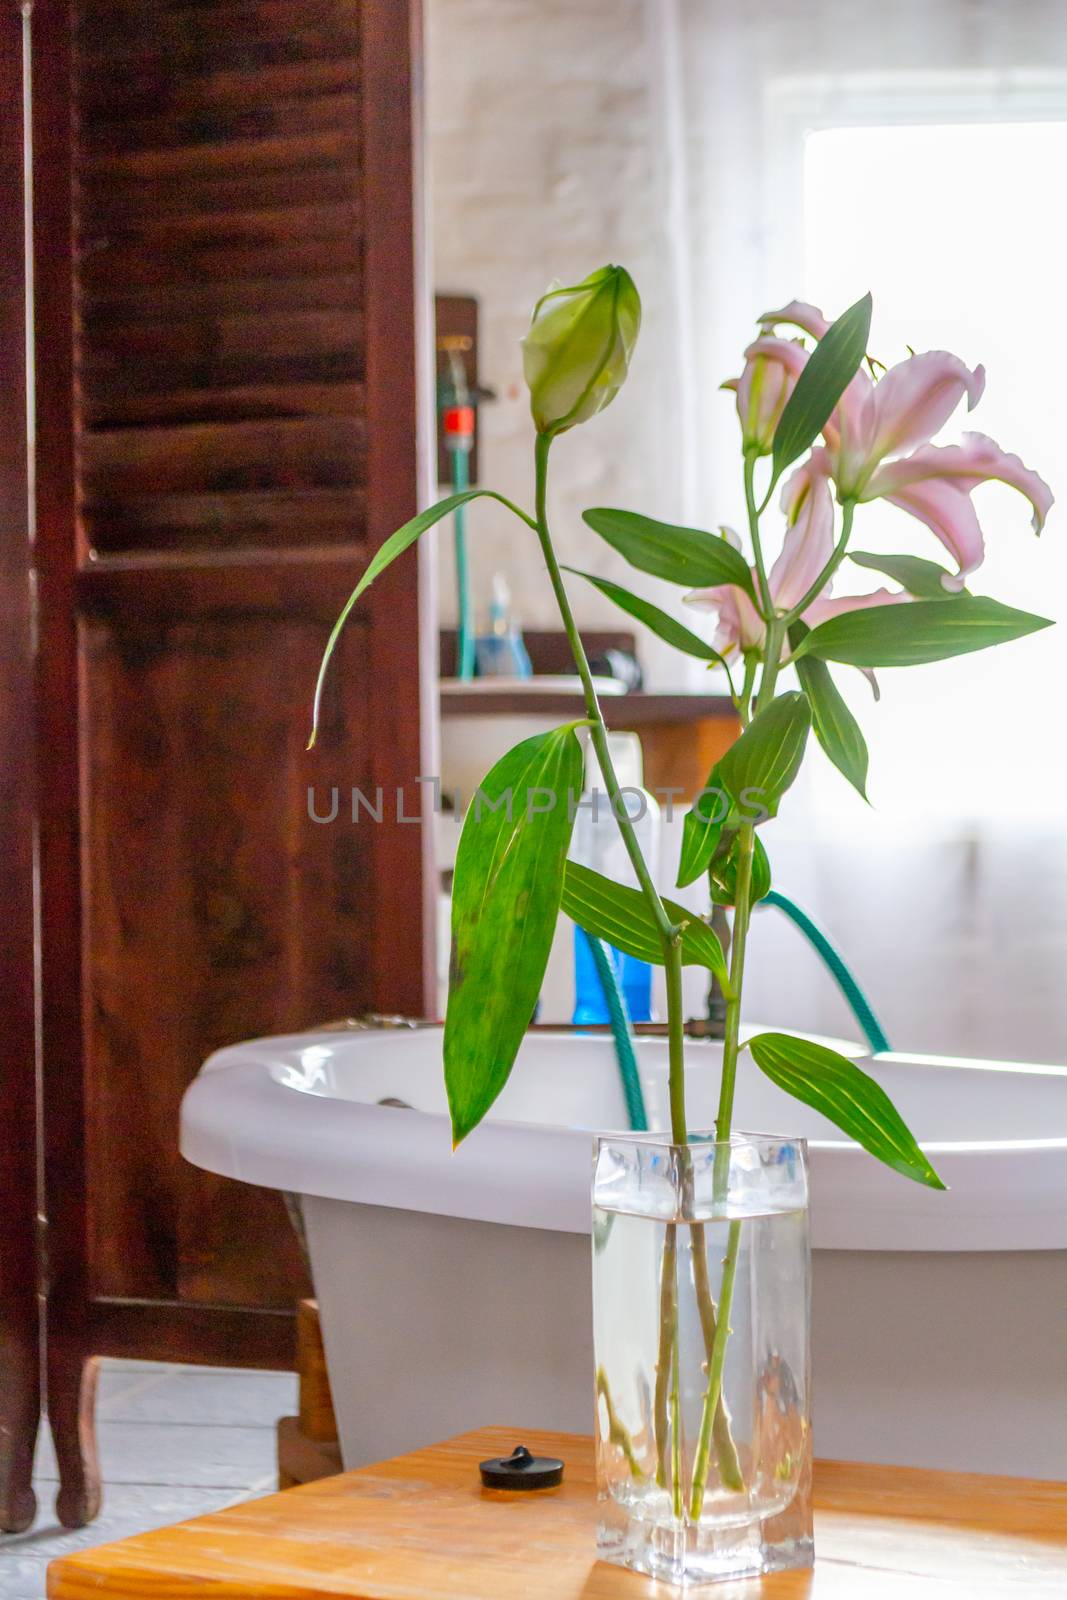 Pink flowers in a vase in a vintage styled bathroom with wooden door. Interior design.